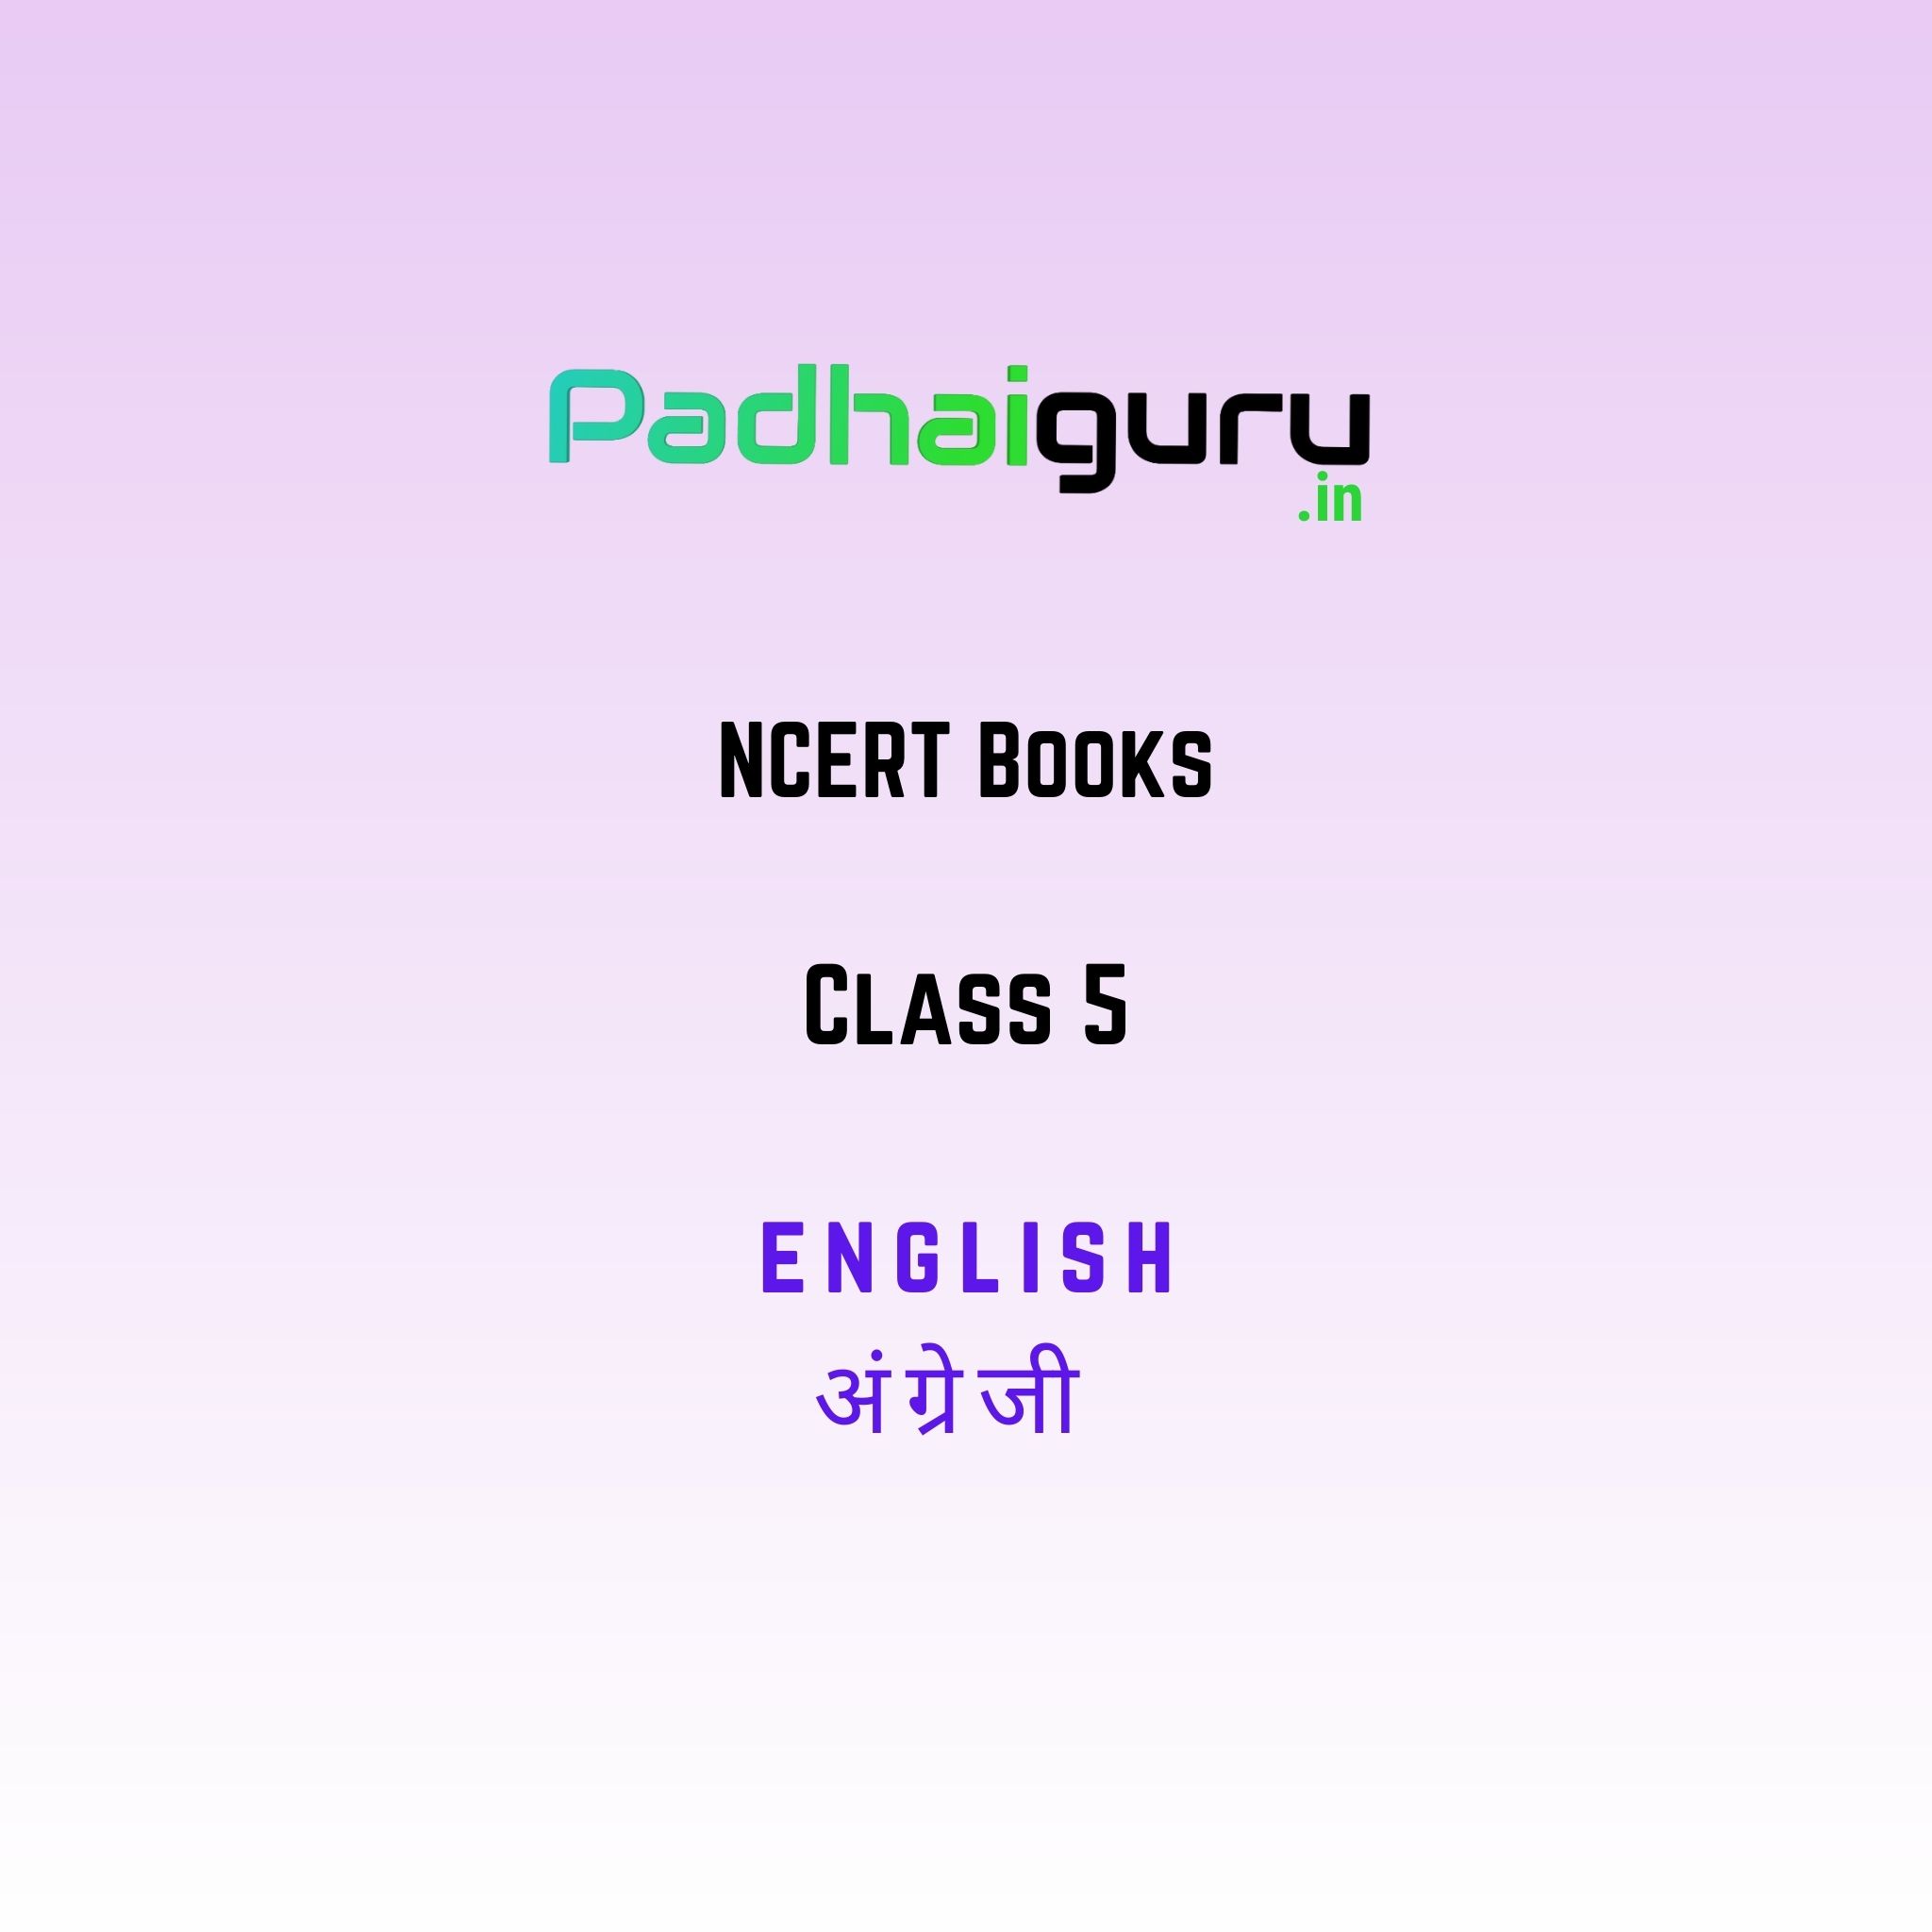 english-class-5-how-to-download-ncert-books-for-class-5-english-for